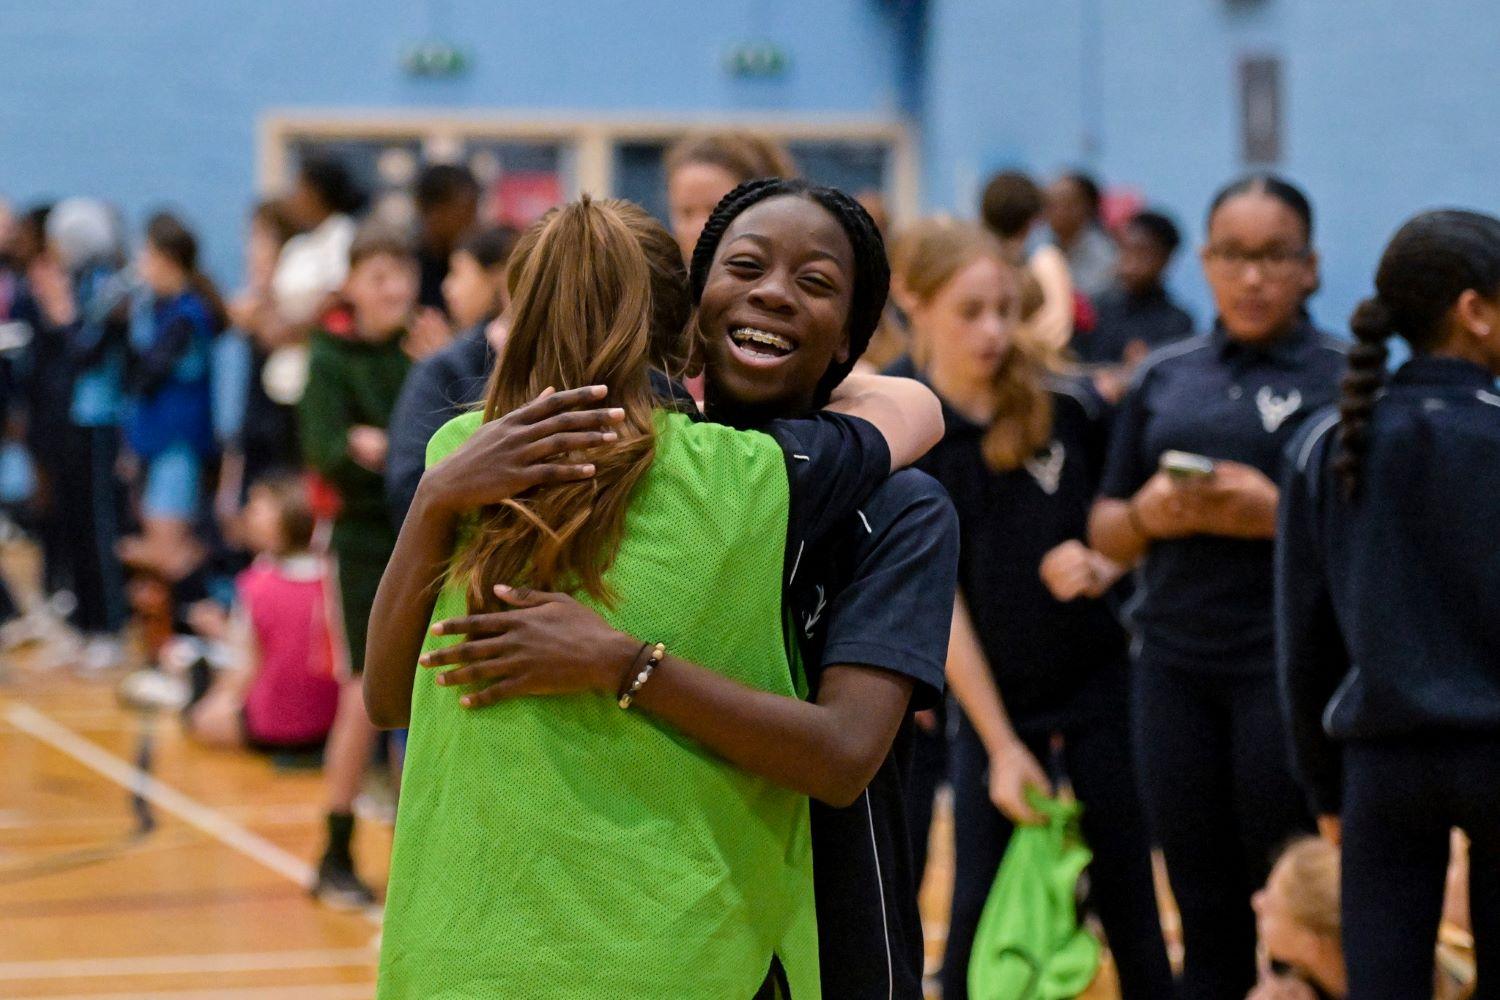 Two young women embracing in a gymnasium.